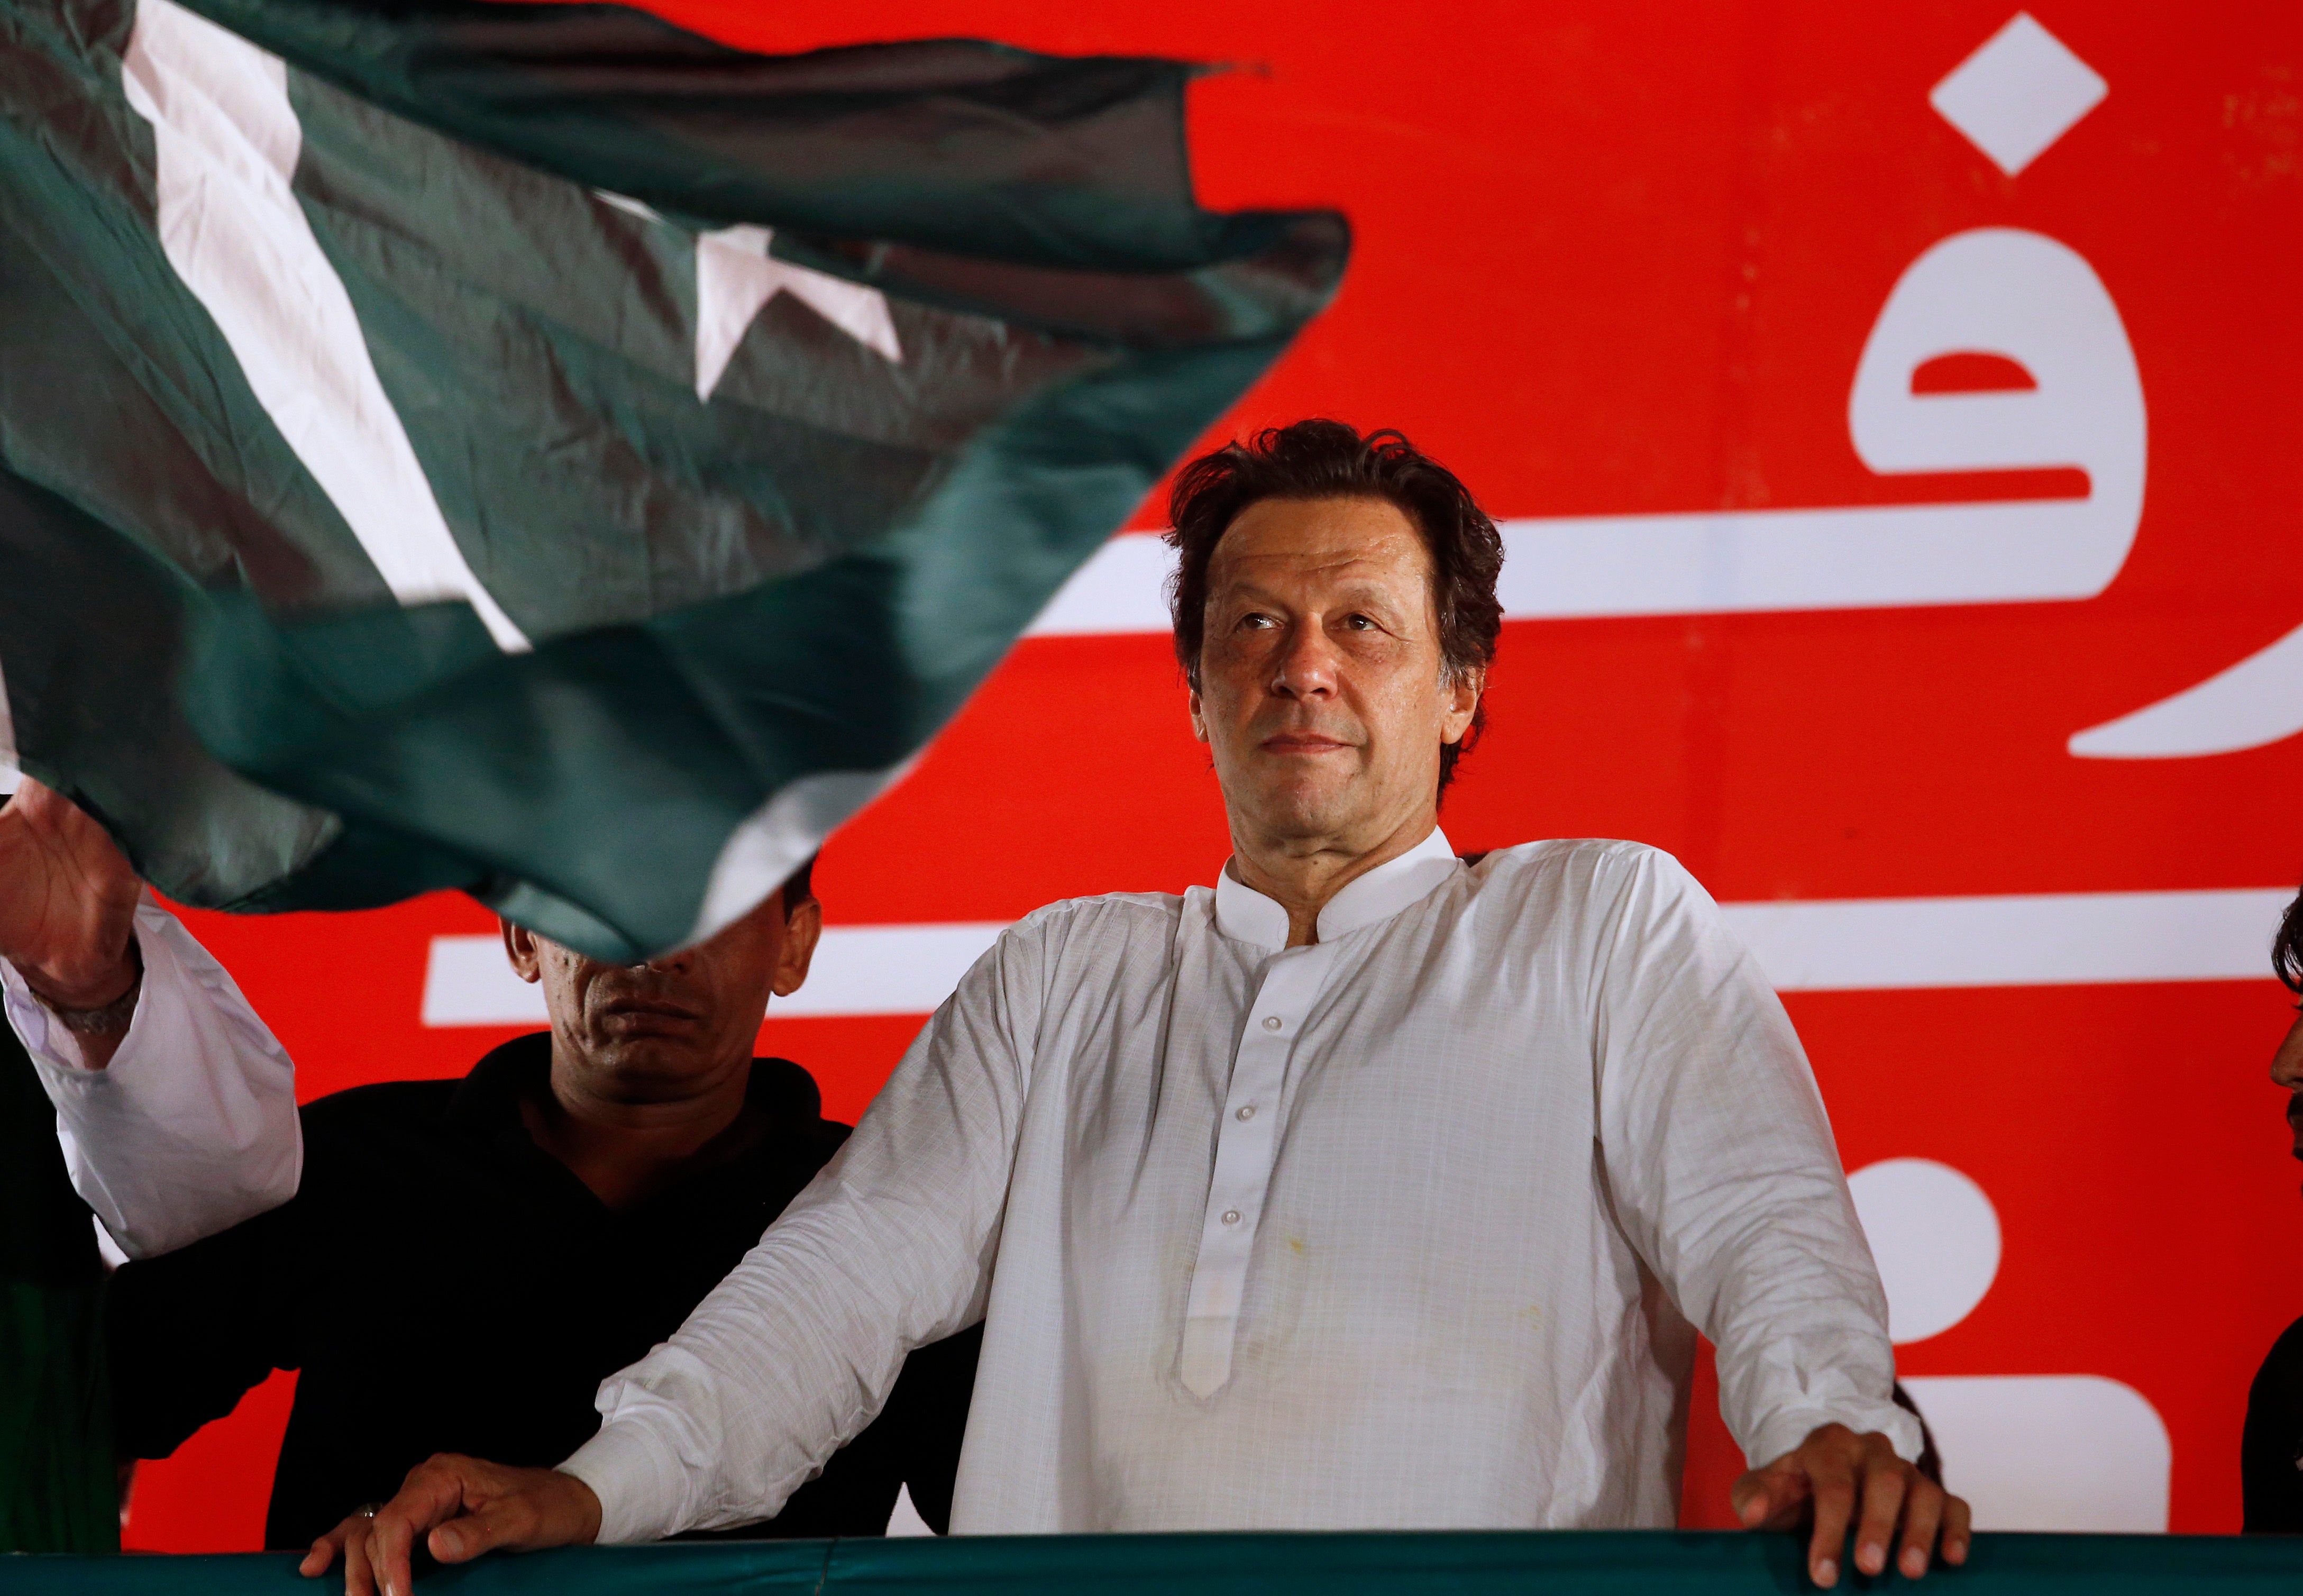 Pakistani politician Imran Khan, chief of Pakistan Tehreek-e-Insaf party, arrives to address an election campaign rally in Islamabad in 2018 – today he’s facing a lifetime behind bars